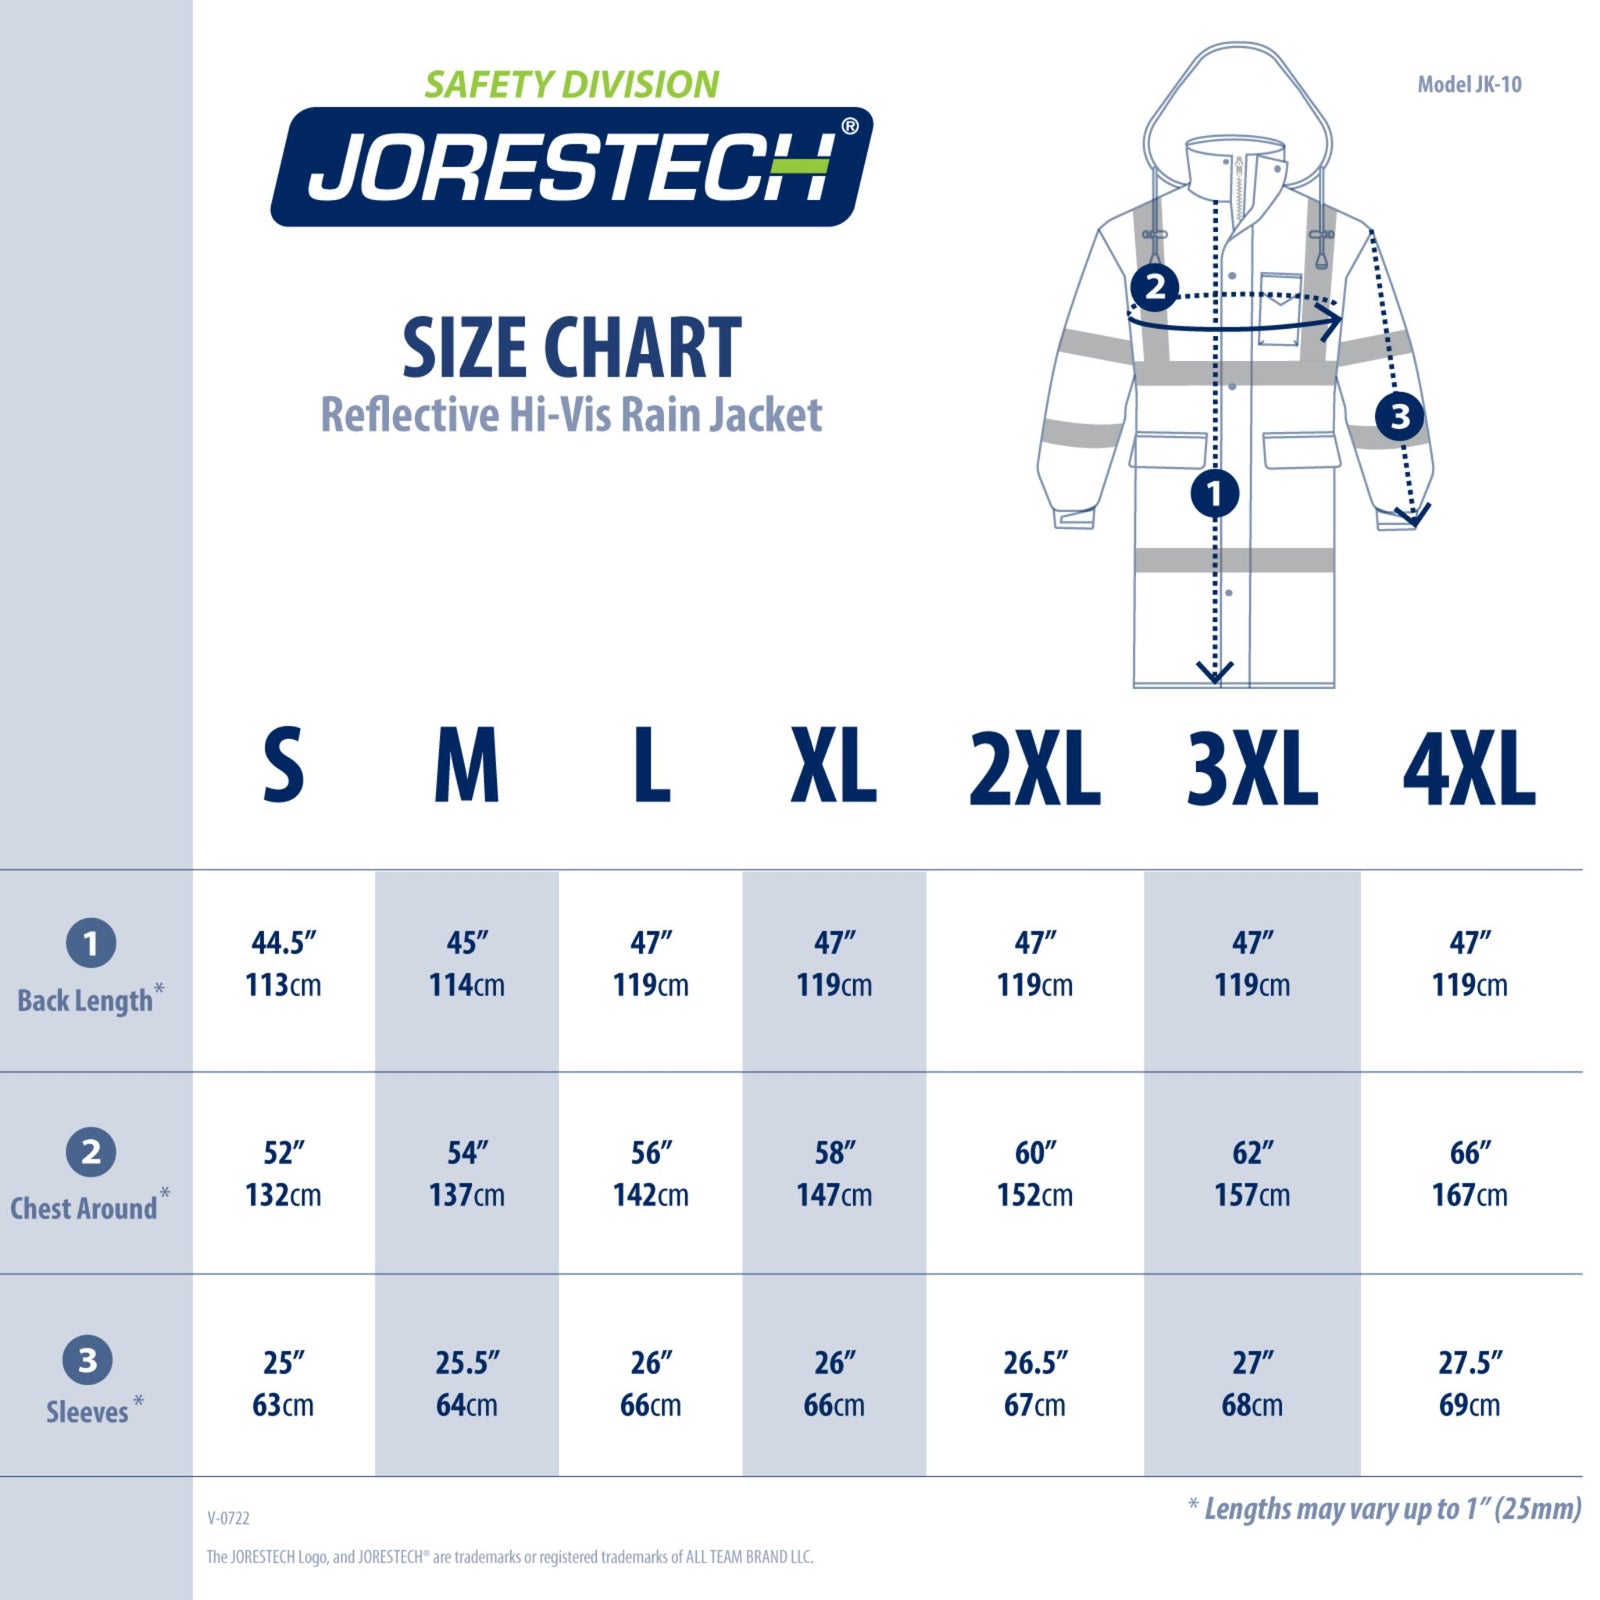 Size chart for the JORESTECH waterproof safety rain coat for road protection